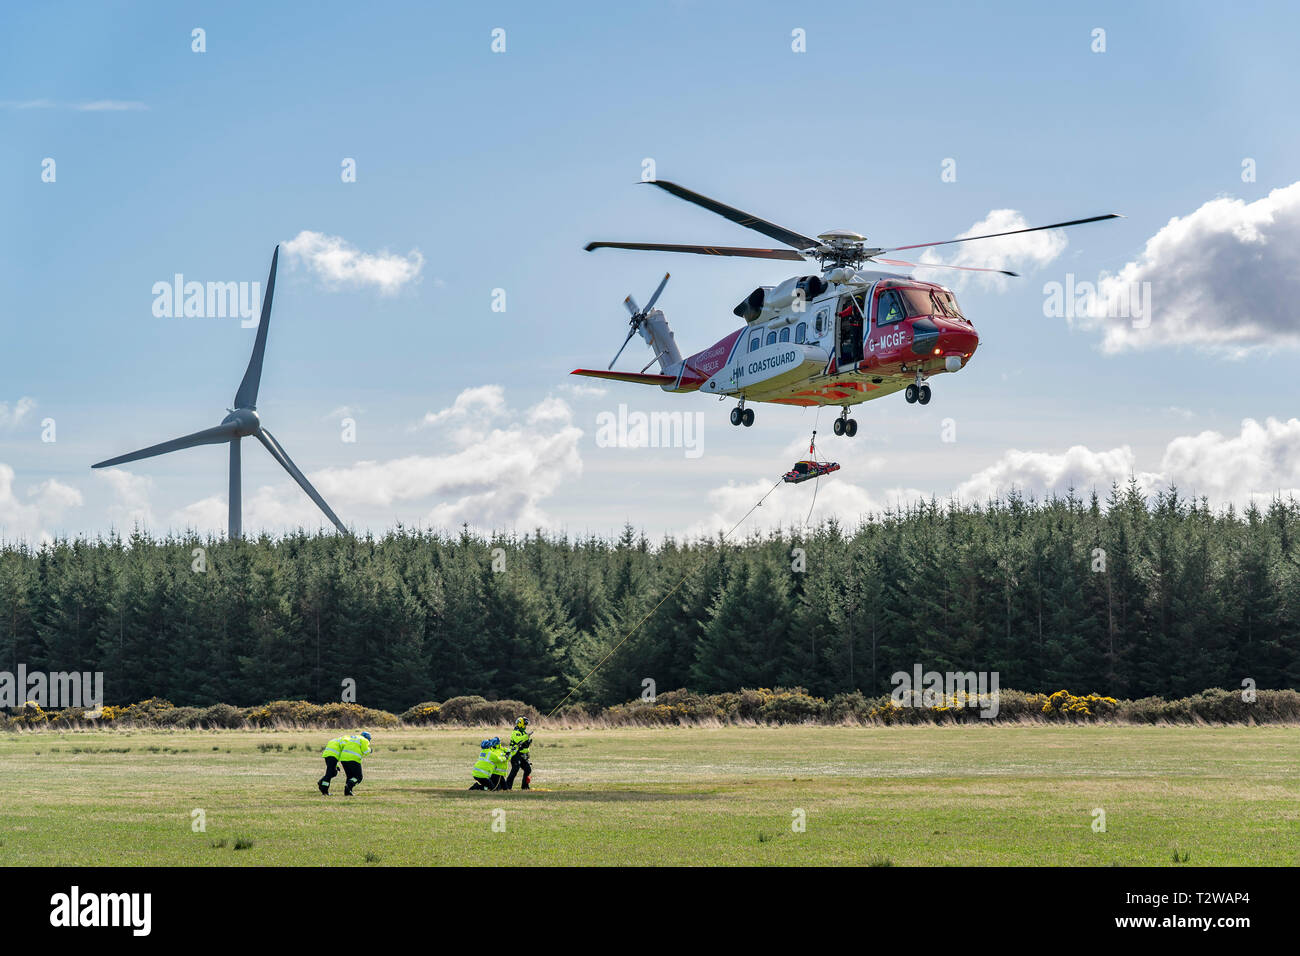 This is a from the HMCG Training Exercise relative to new staff at Boyndie Airfield, Aberdeenshire, Scotland on Saturday 30 March 2019. Photographed b Stock Photo